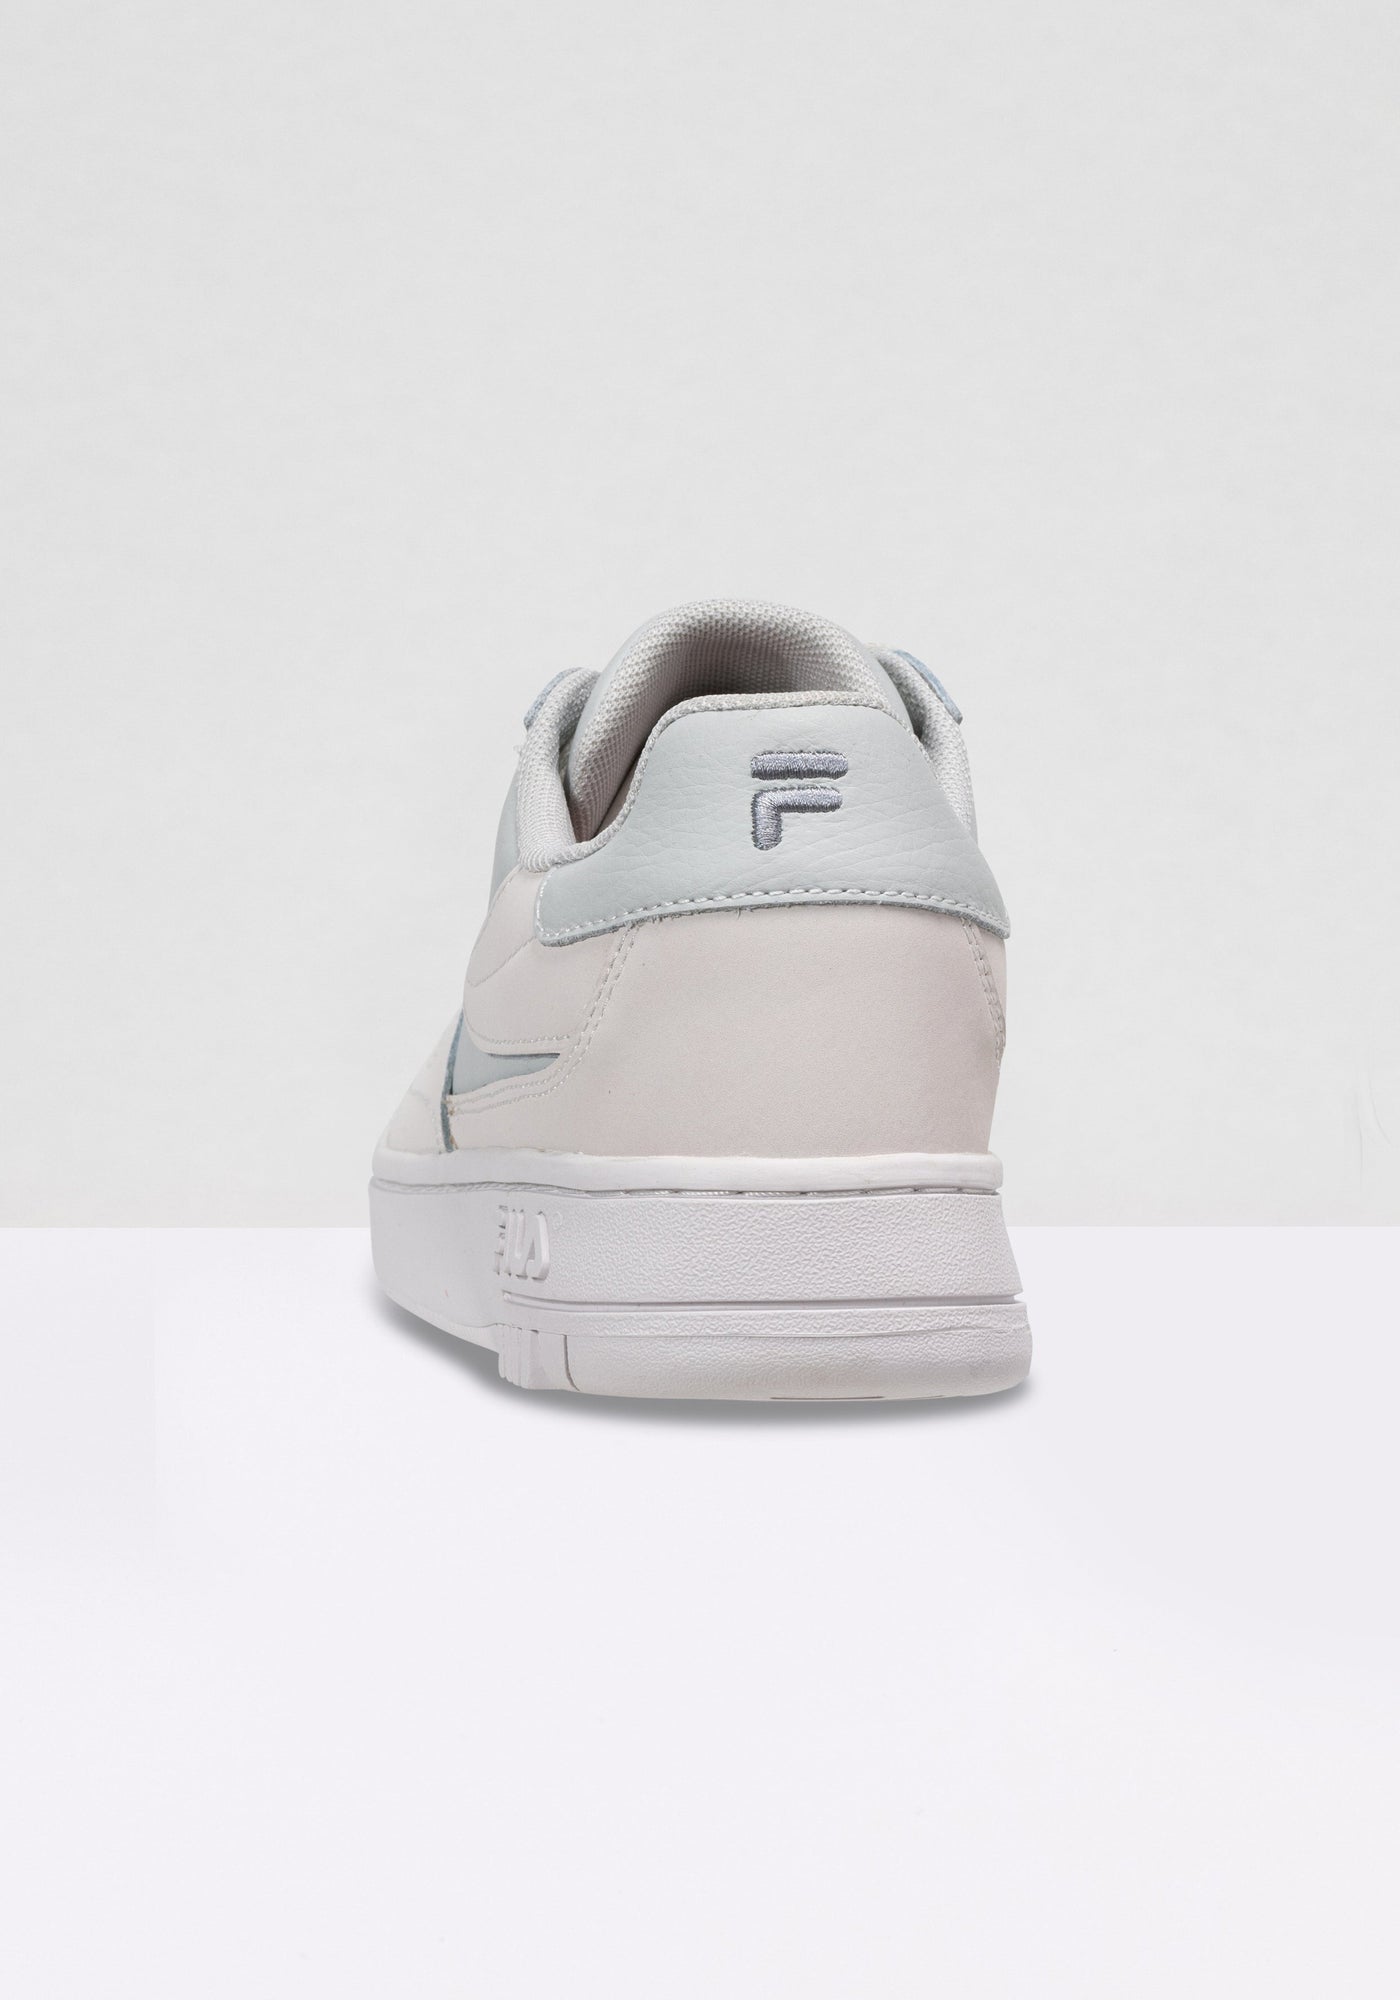 Fxventuno L Low in Gray Violet Sneakers Fila   